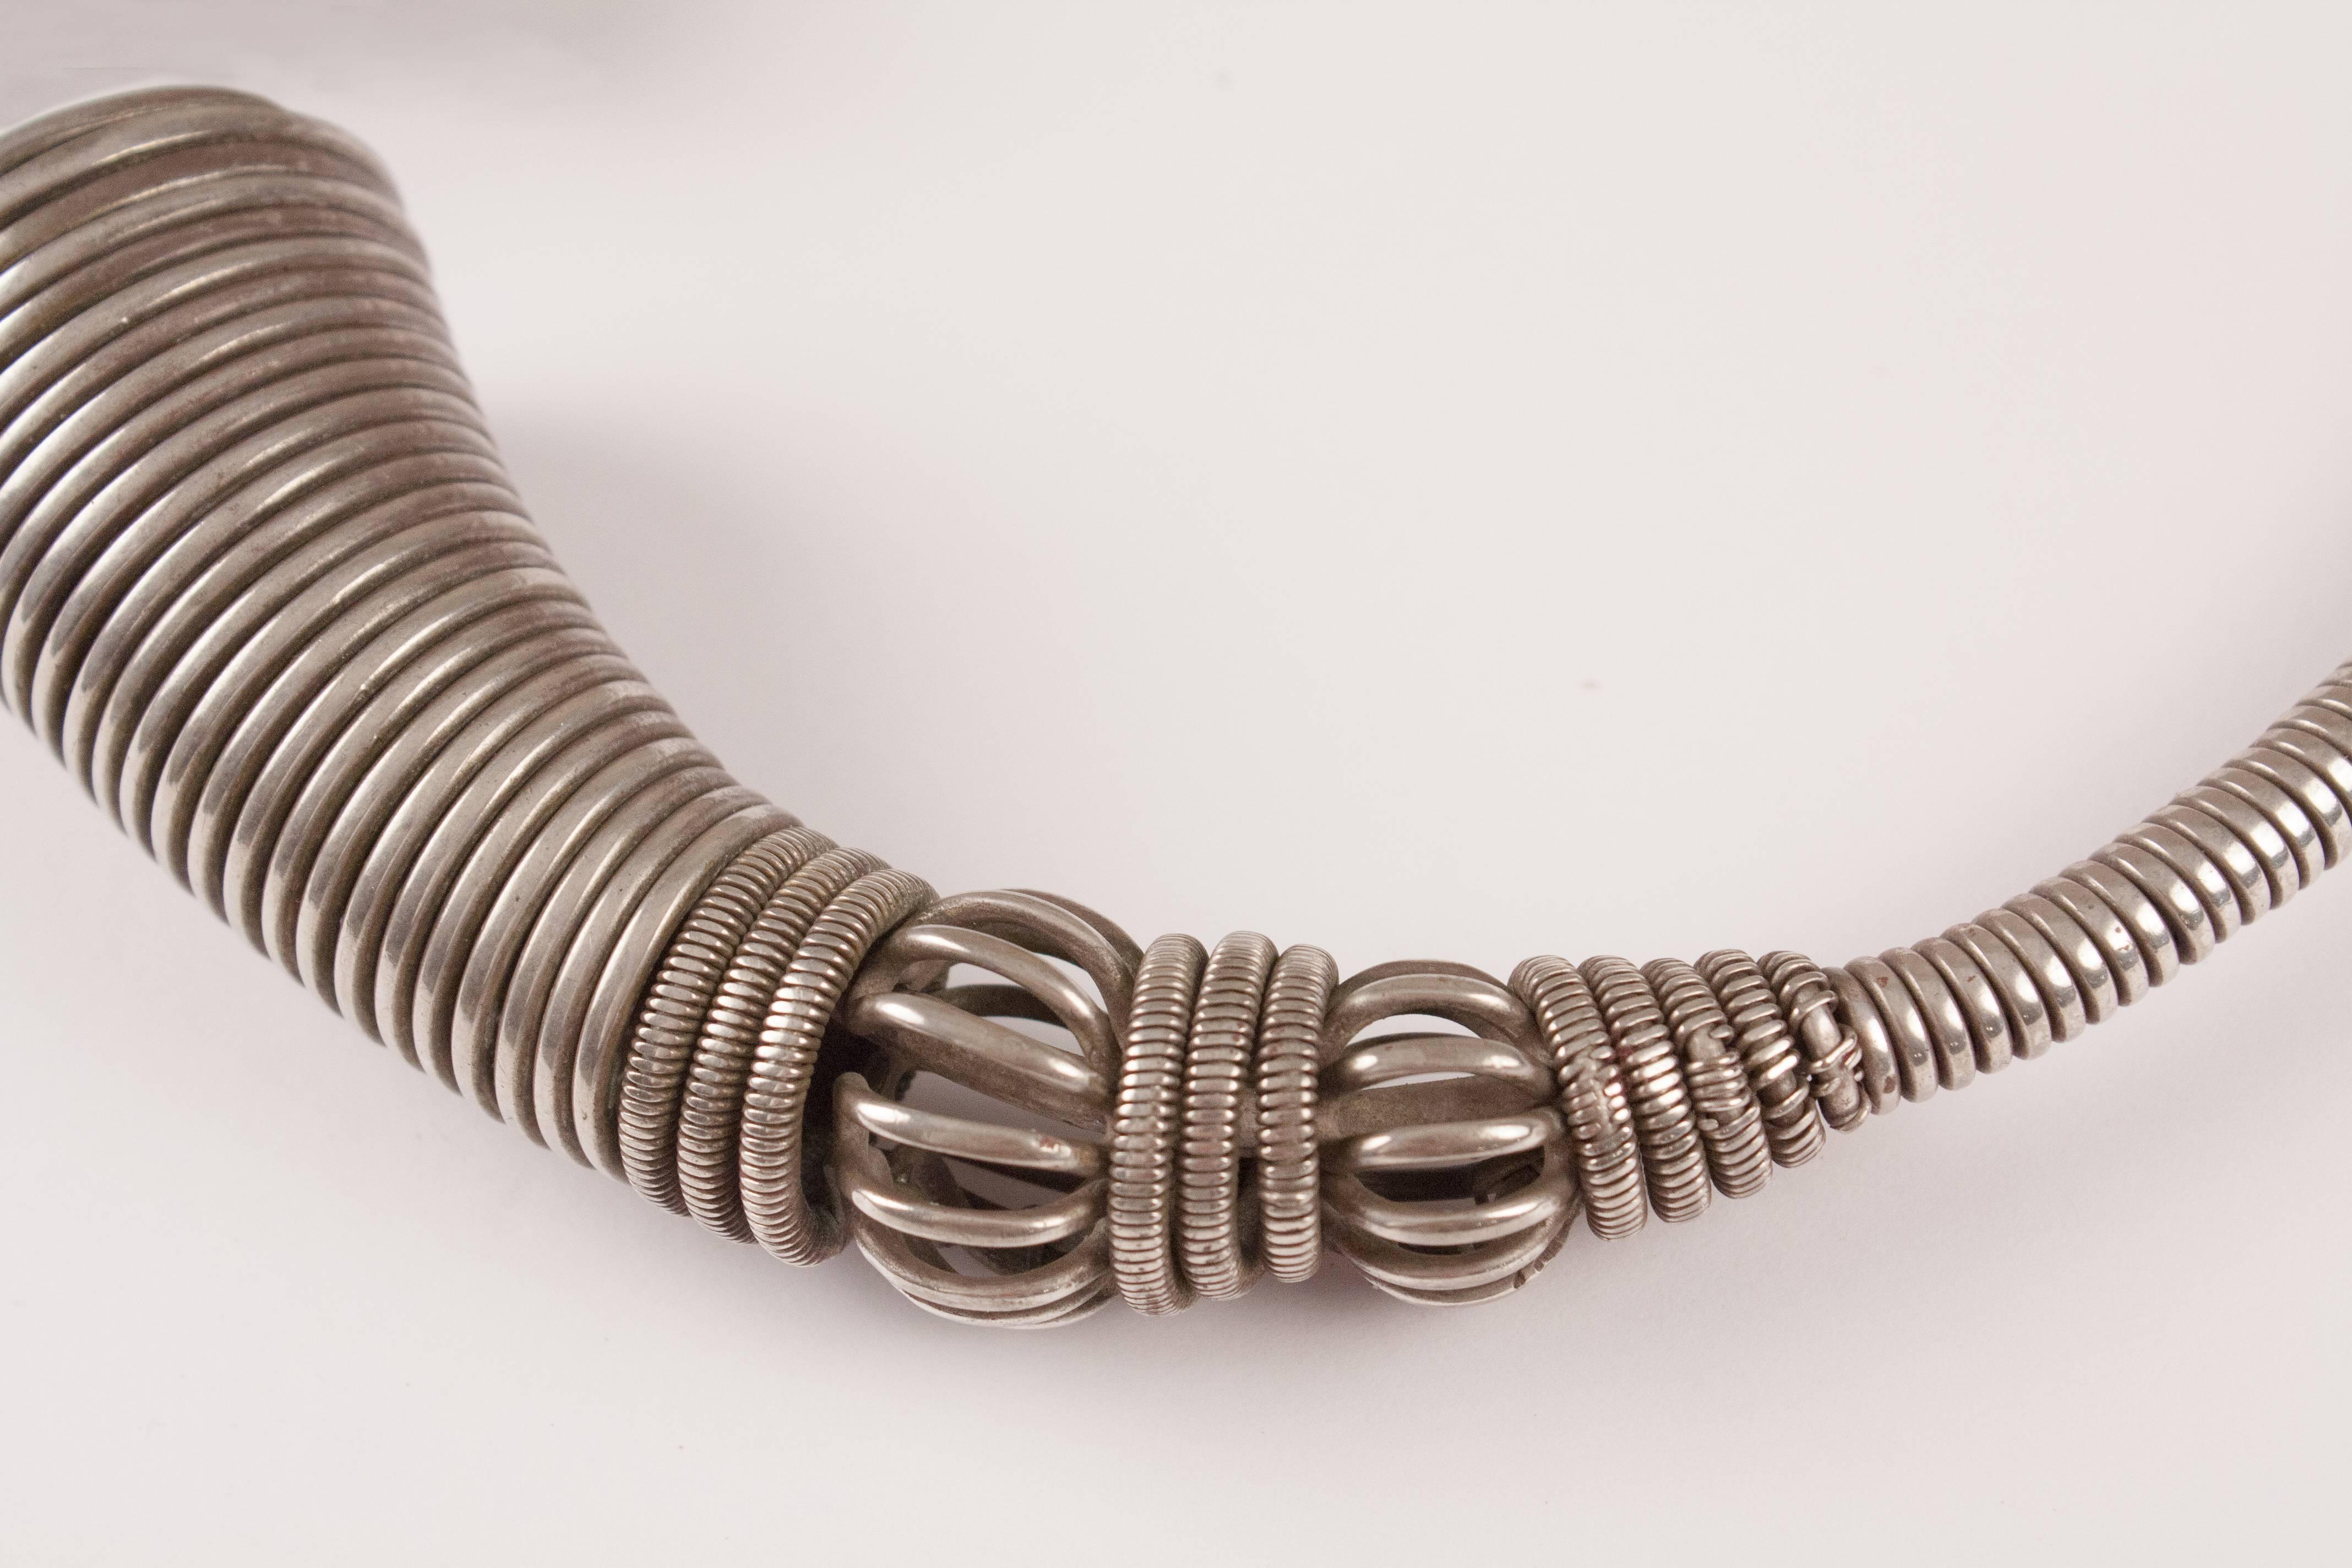 Indian Traditional Silver Torque Necklace from India